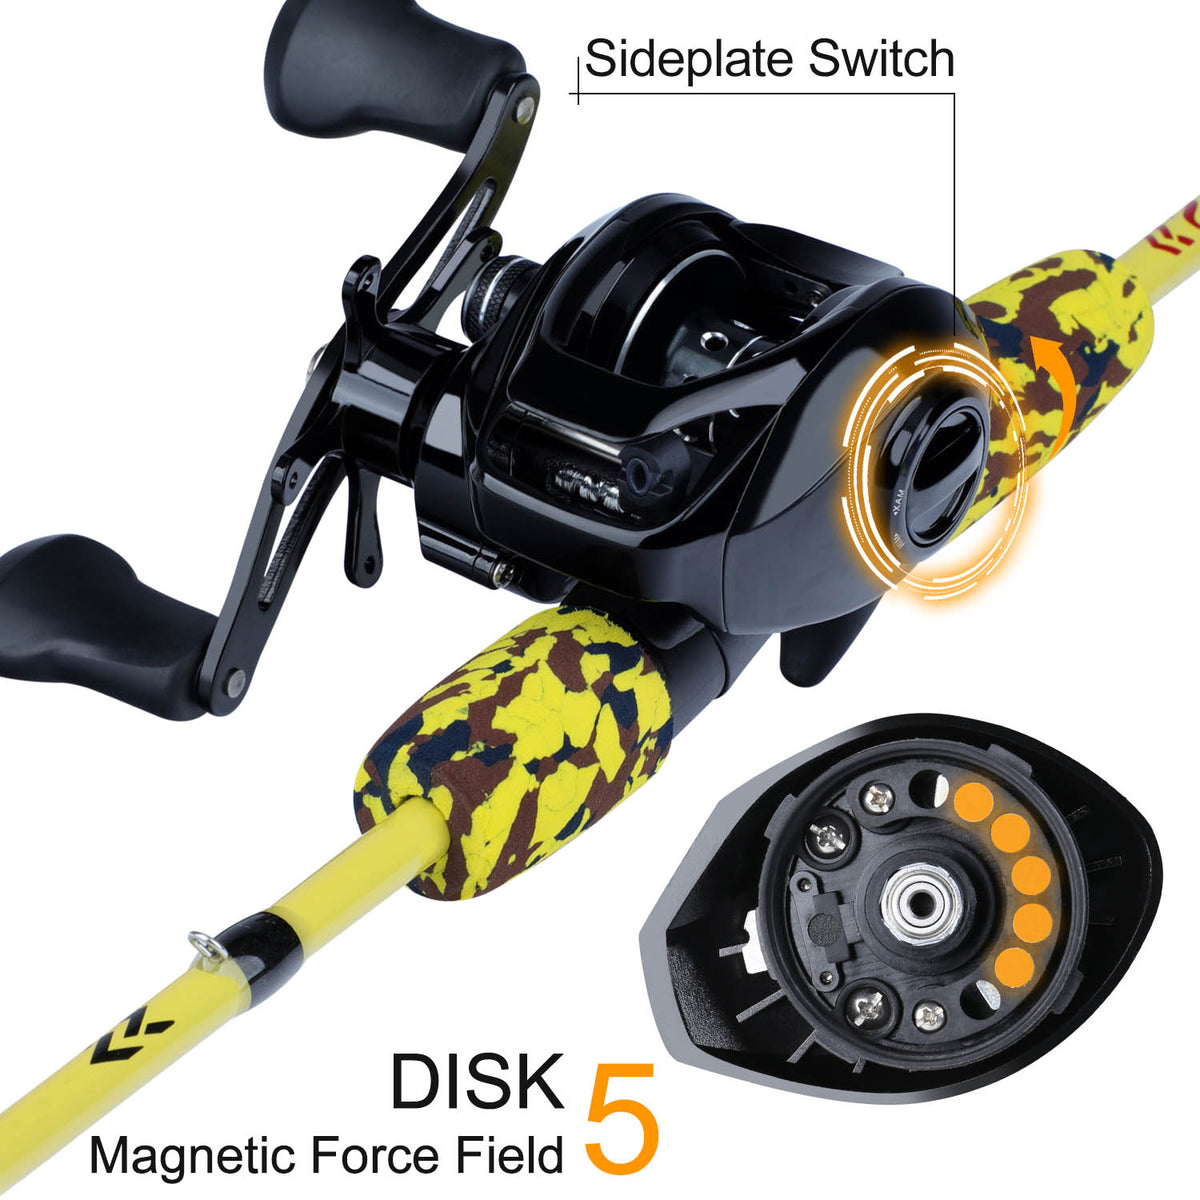 FLADEN Camo All-Round Tele Rod and Reel Combo with Tackle Box & Accessories  - YYS International